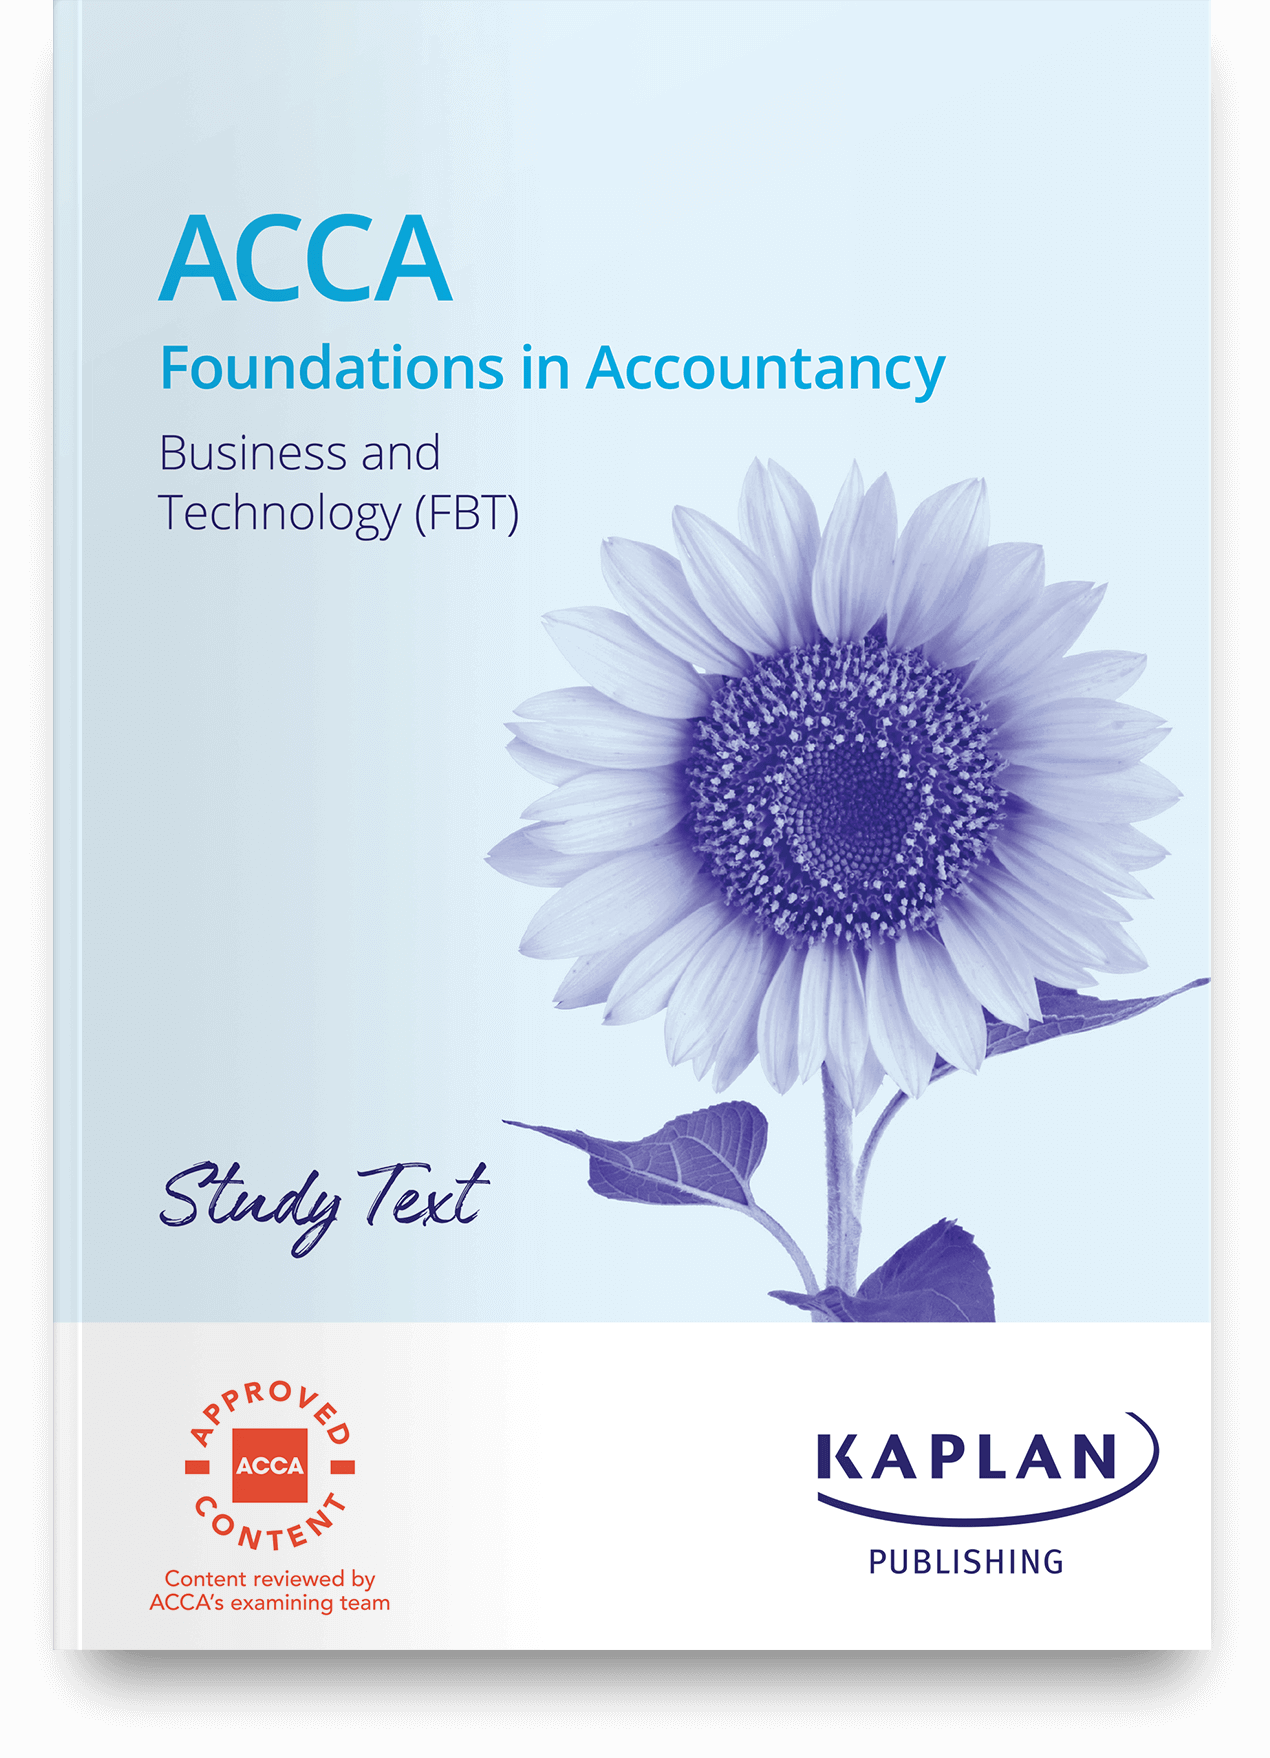 ACCA Foundation Business and Technology (FBT) Study Text (Valid Till Aug 2024) - Kaplan - 9781839963599 - Kaplan Publishing